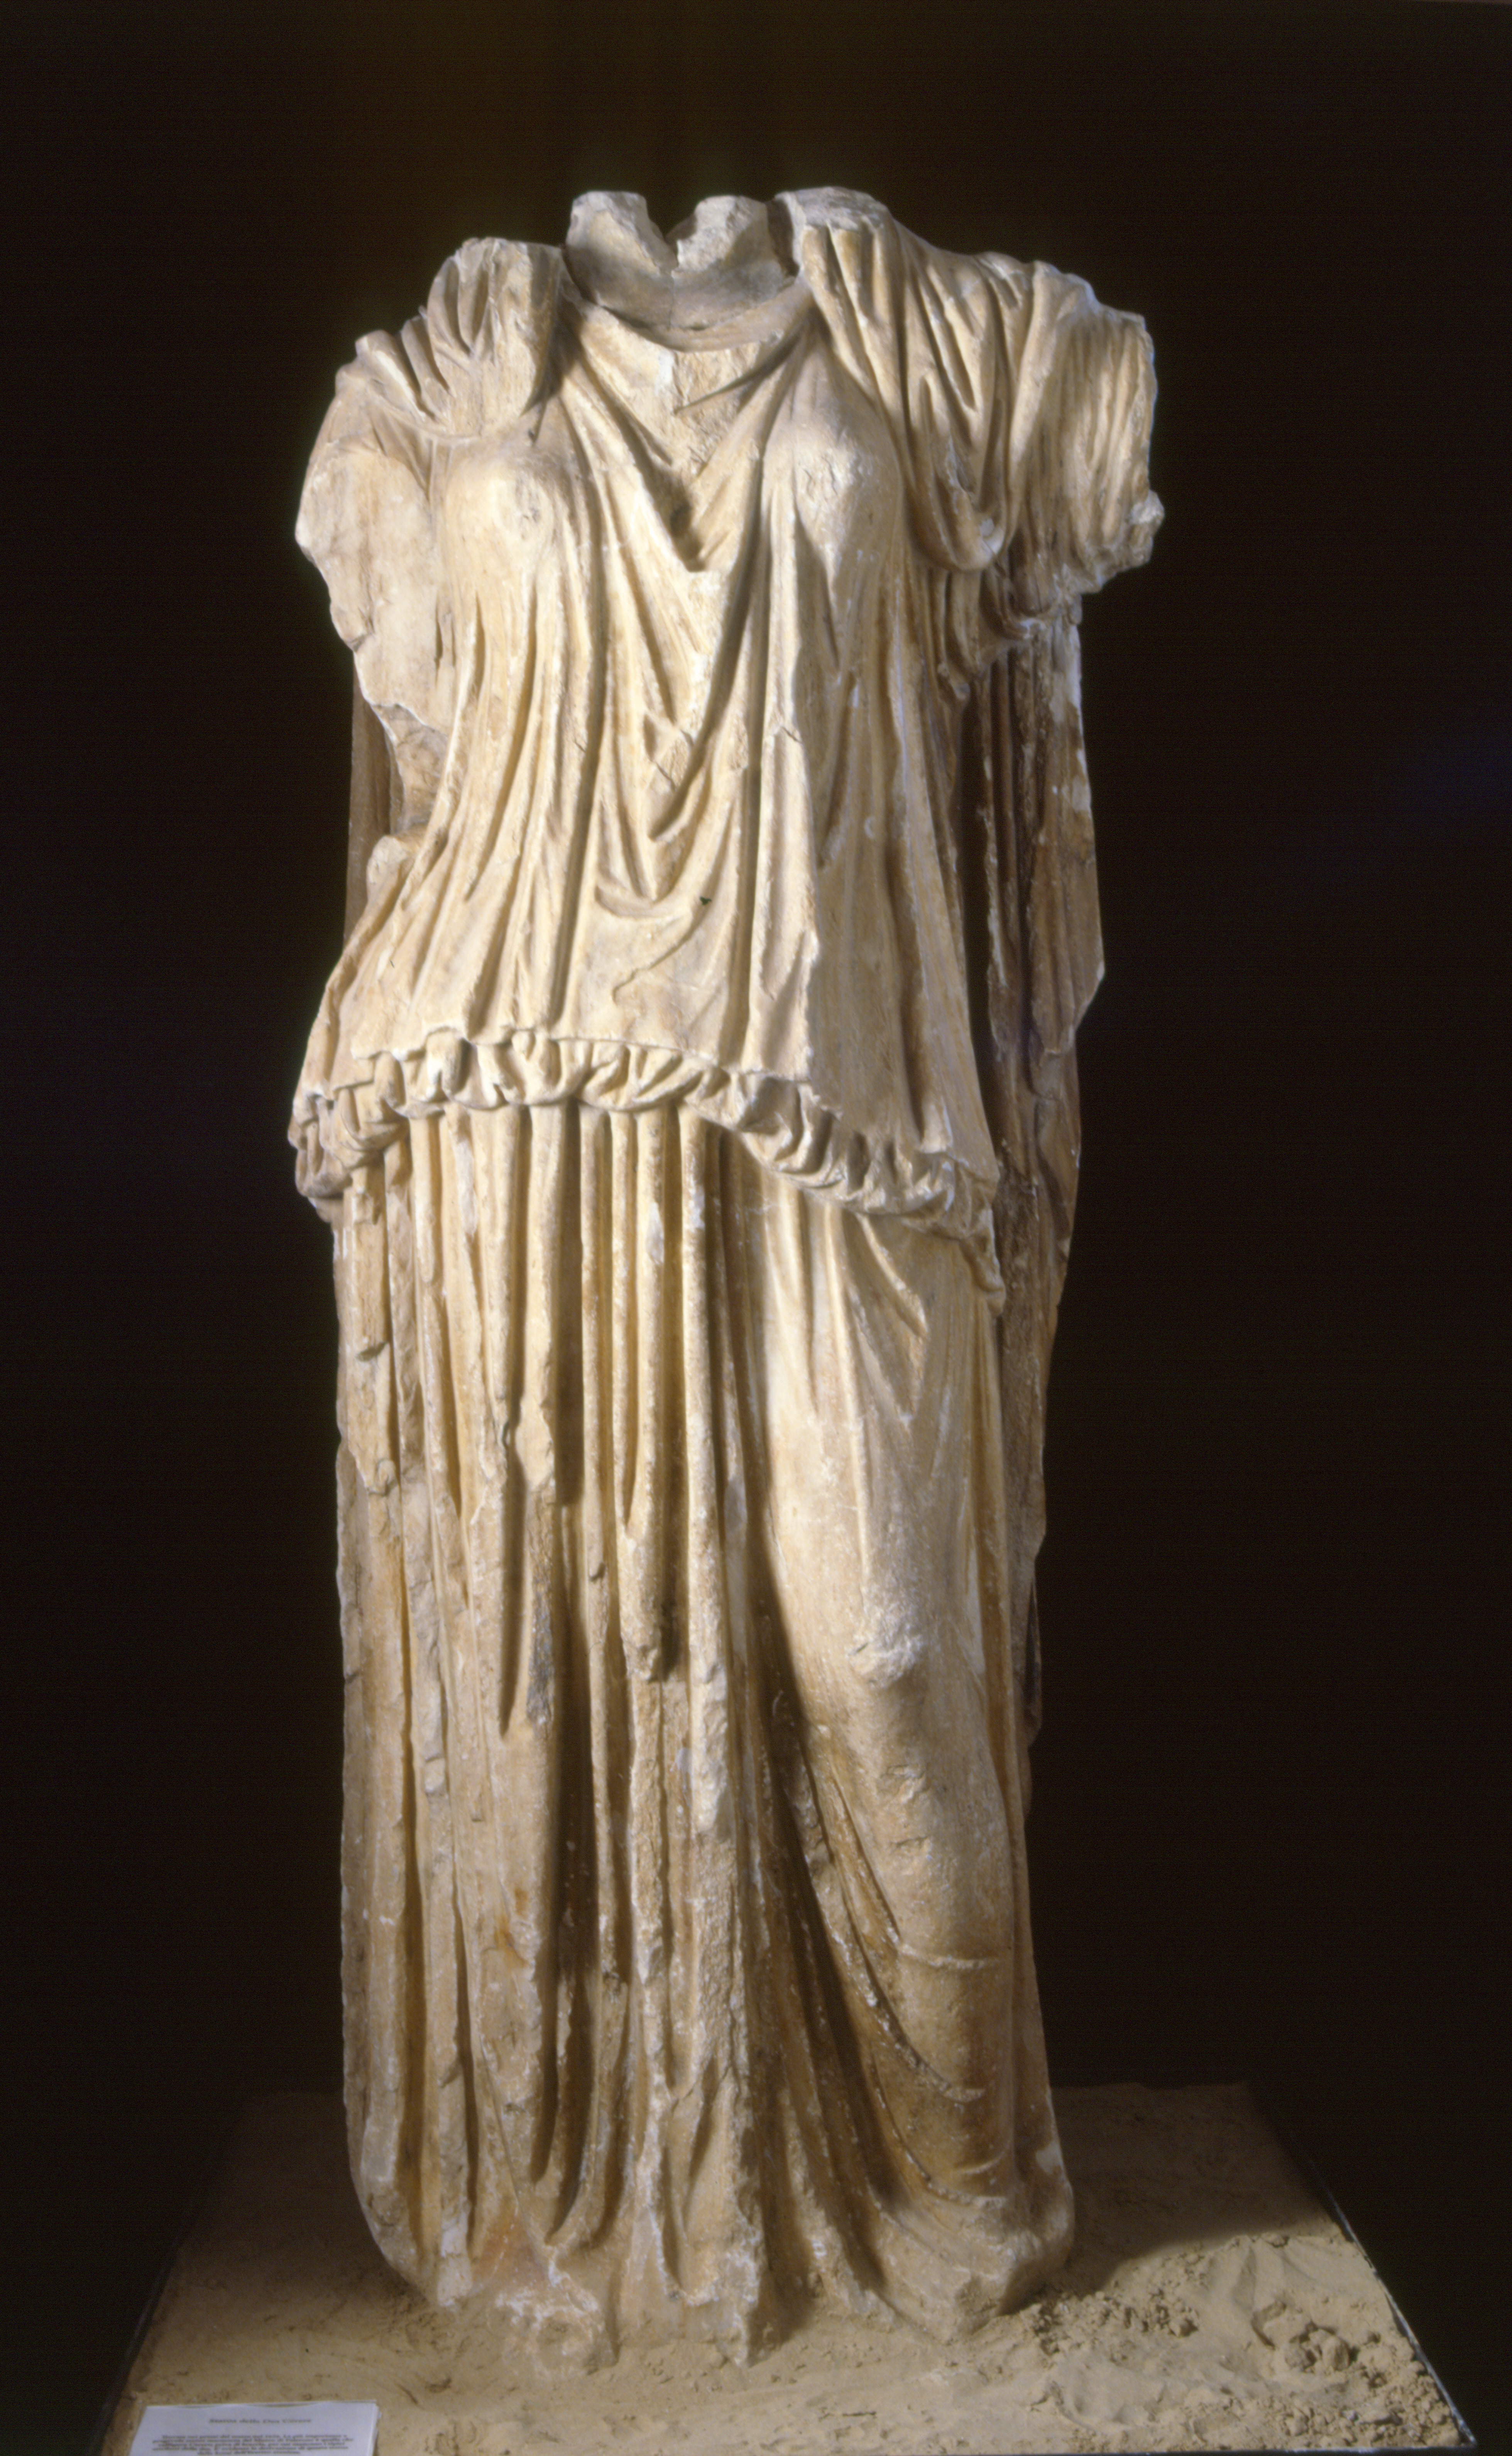  Figure 2. Marble statue of Cereres probably originally located in one of the niches of the scaenae frons of the theatre of falerio picens, but discovered in one of the vomitoria. Antiquarium of Falerone. Courtesy of the Italian Ministry of Culture 